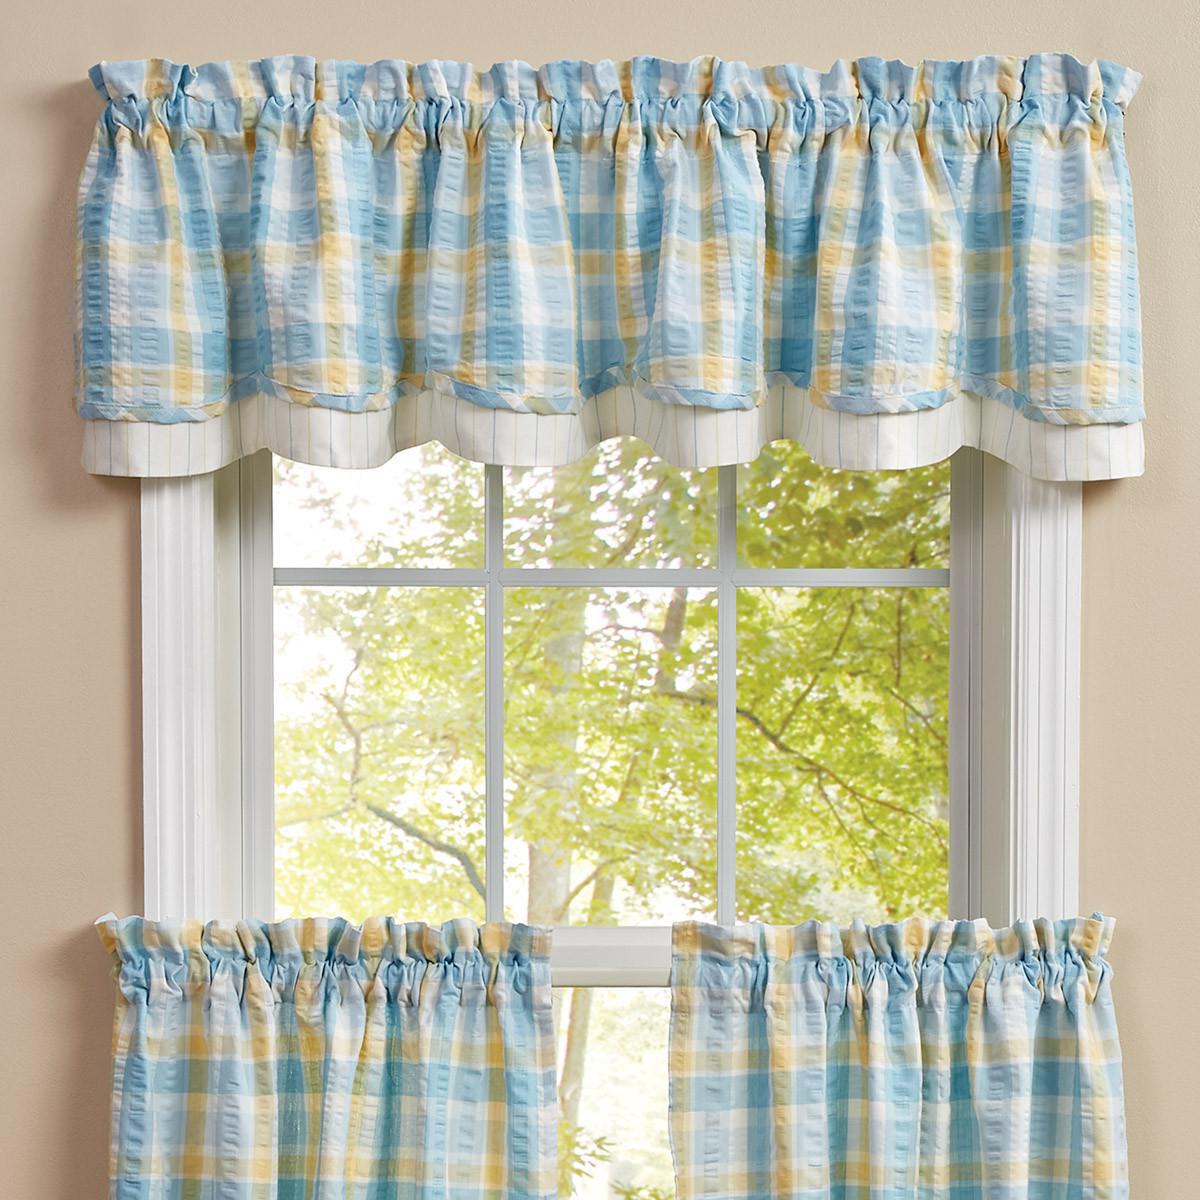 Park Design Forget Me Not Lined Layered Valance